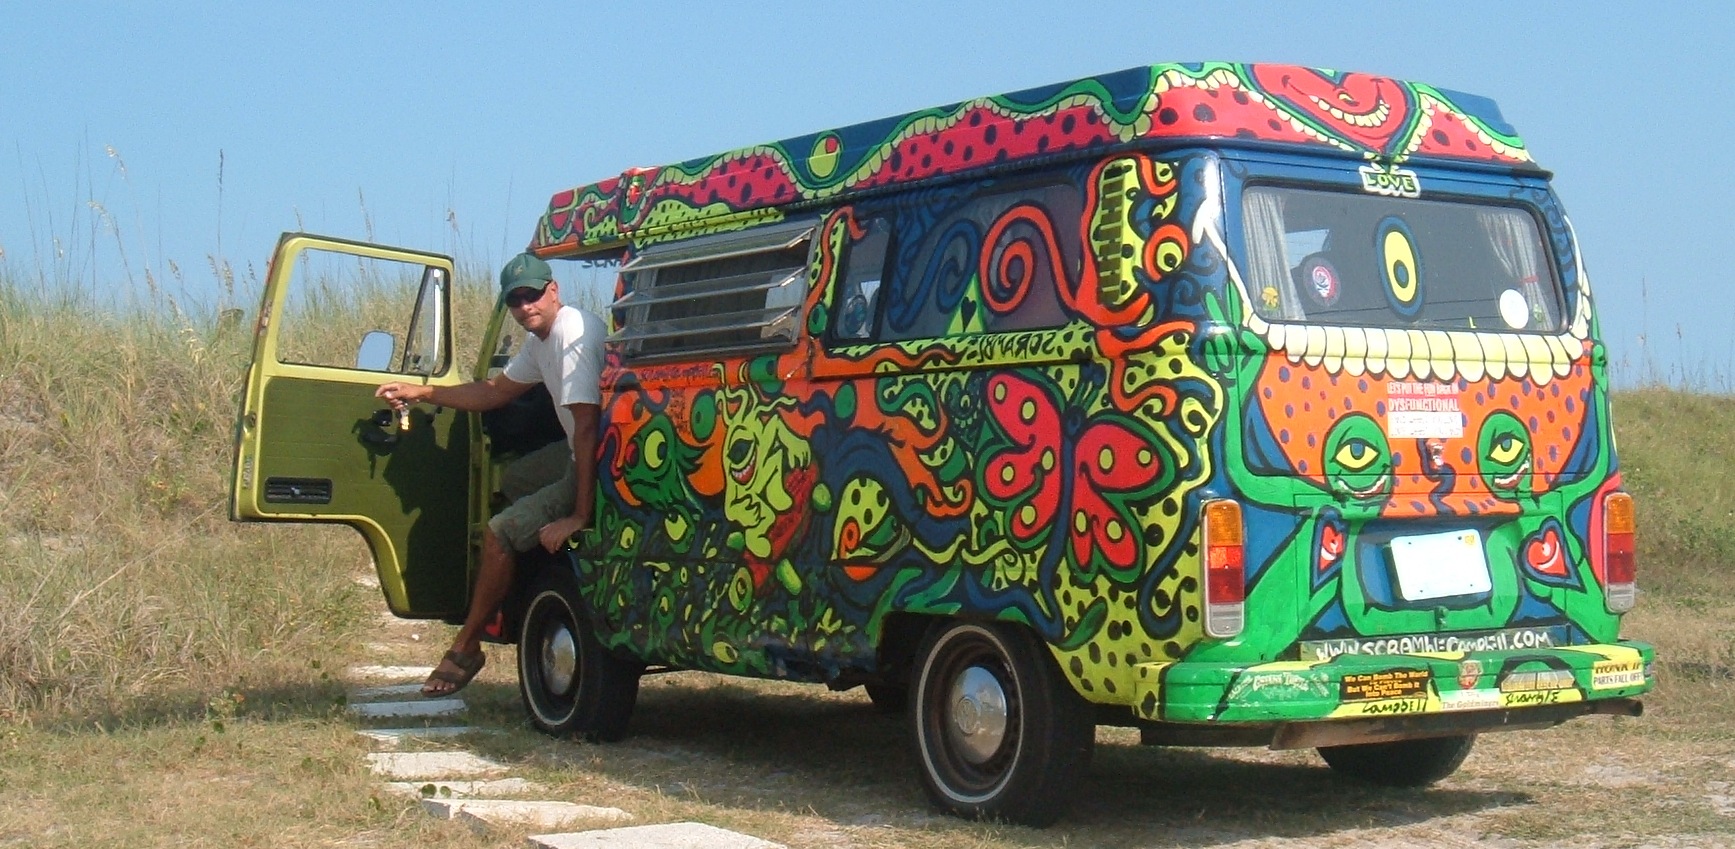 Whoa Hippie Van Awesome P By Gurlgoinghost On Deviantart